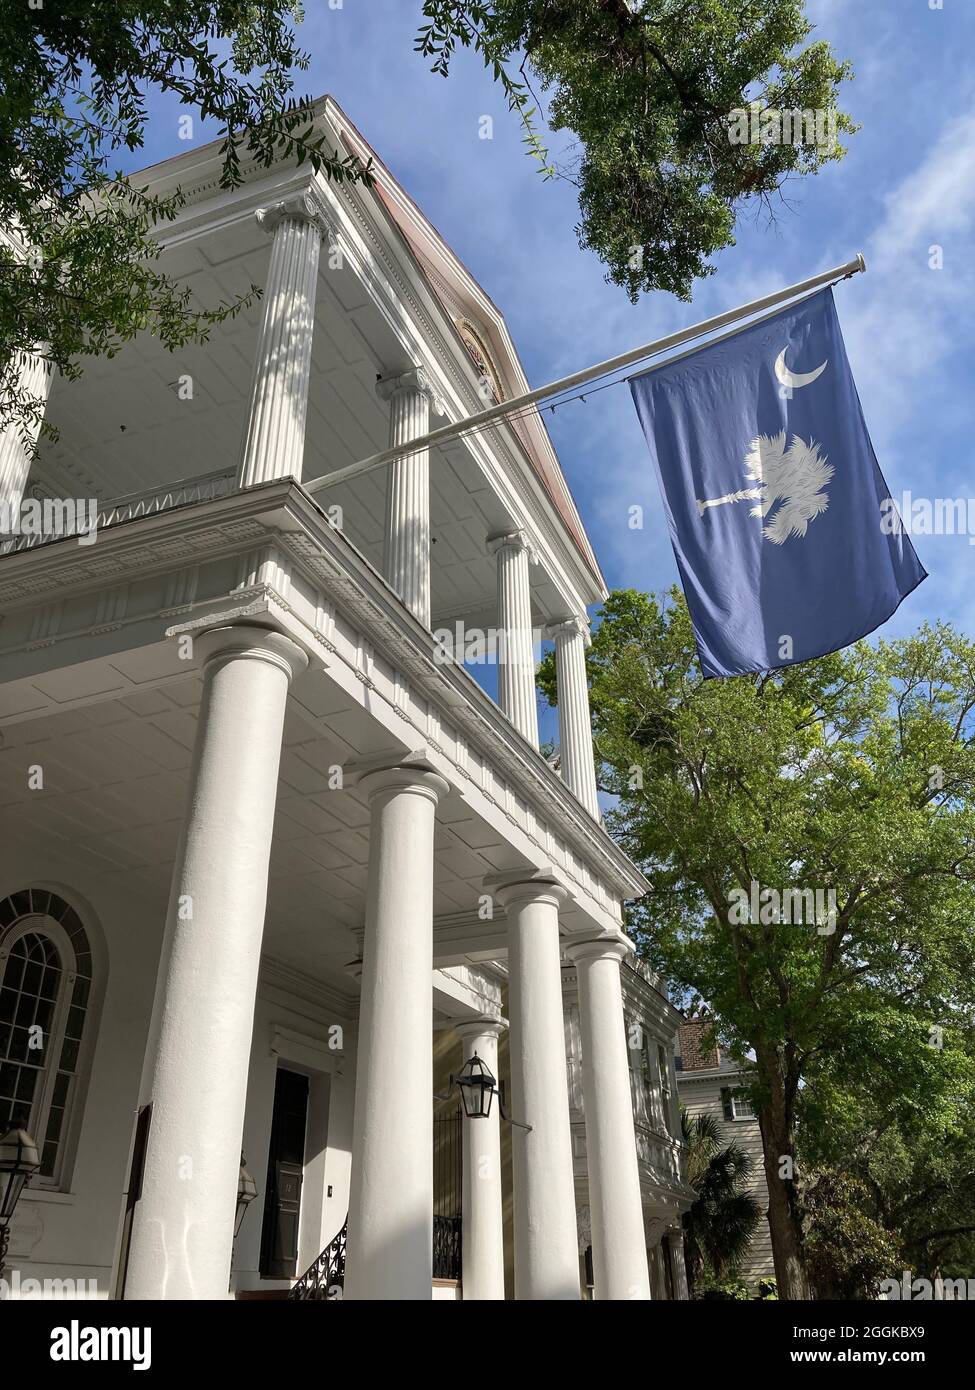 Colonial home in Charleston, South Carolina, with flag of South Carolina. Flag consists of white palmetto tree and white crescent. Stock Photo